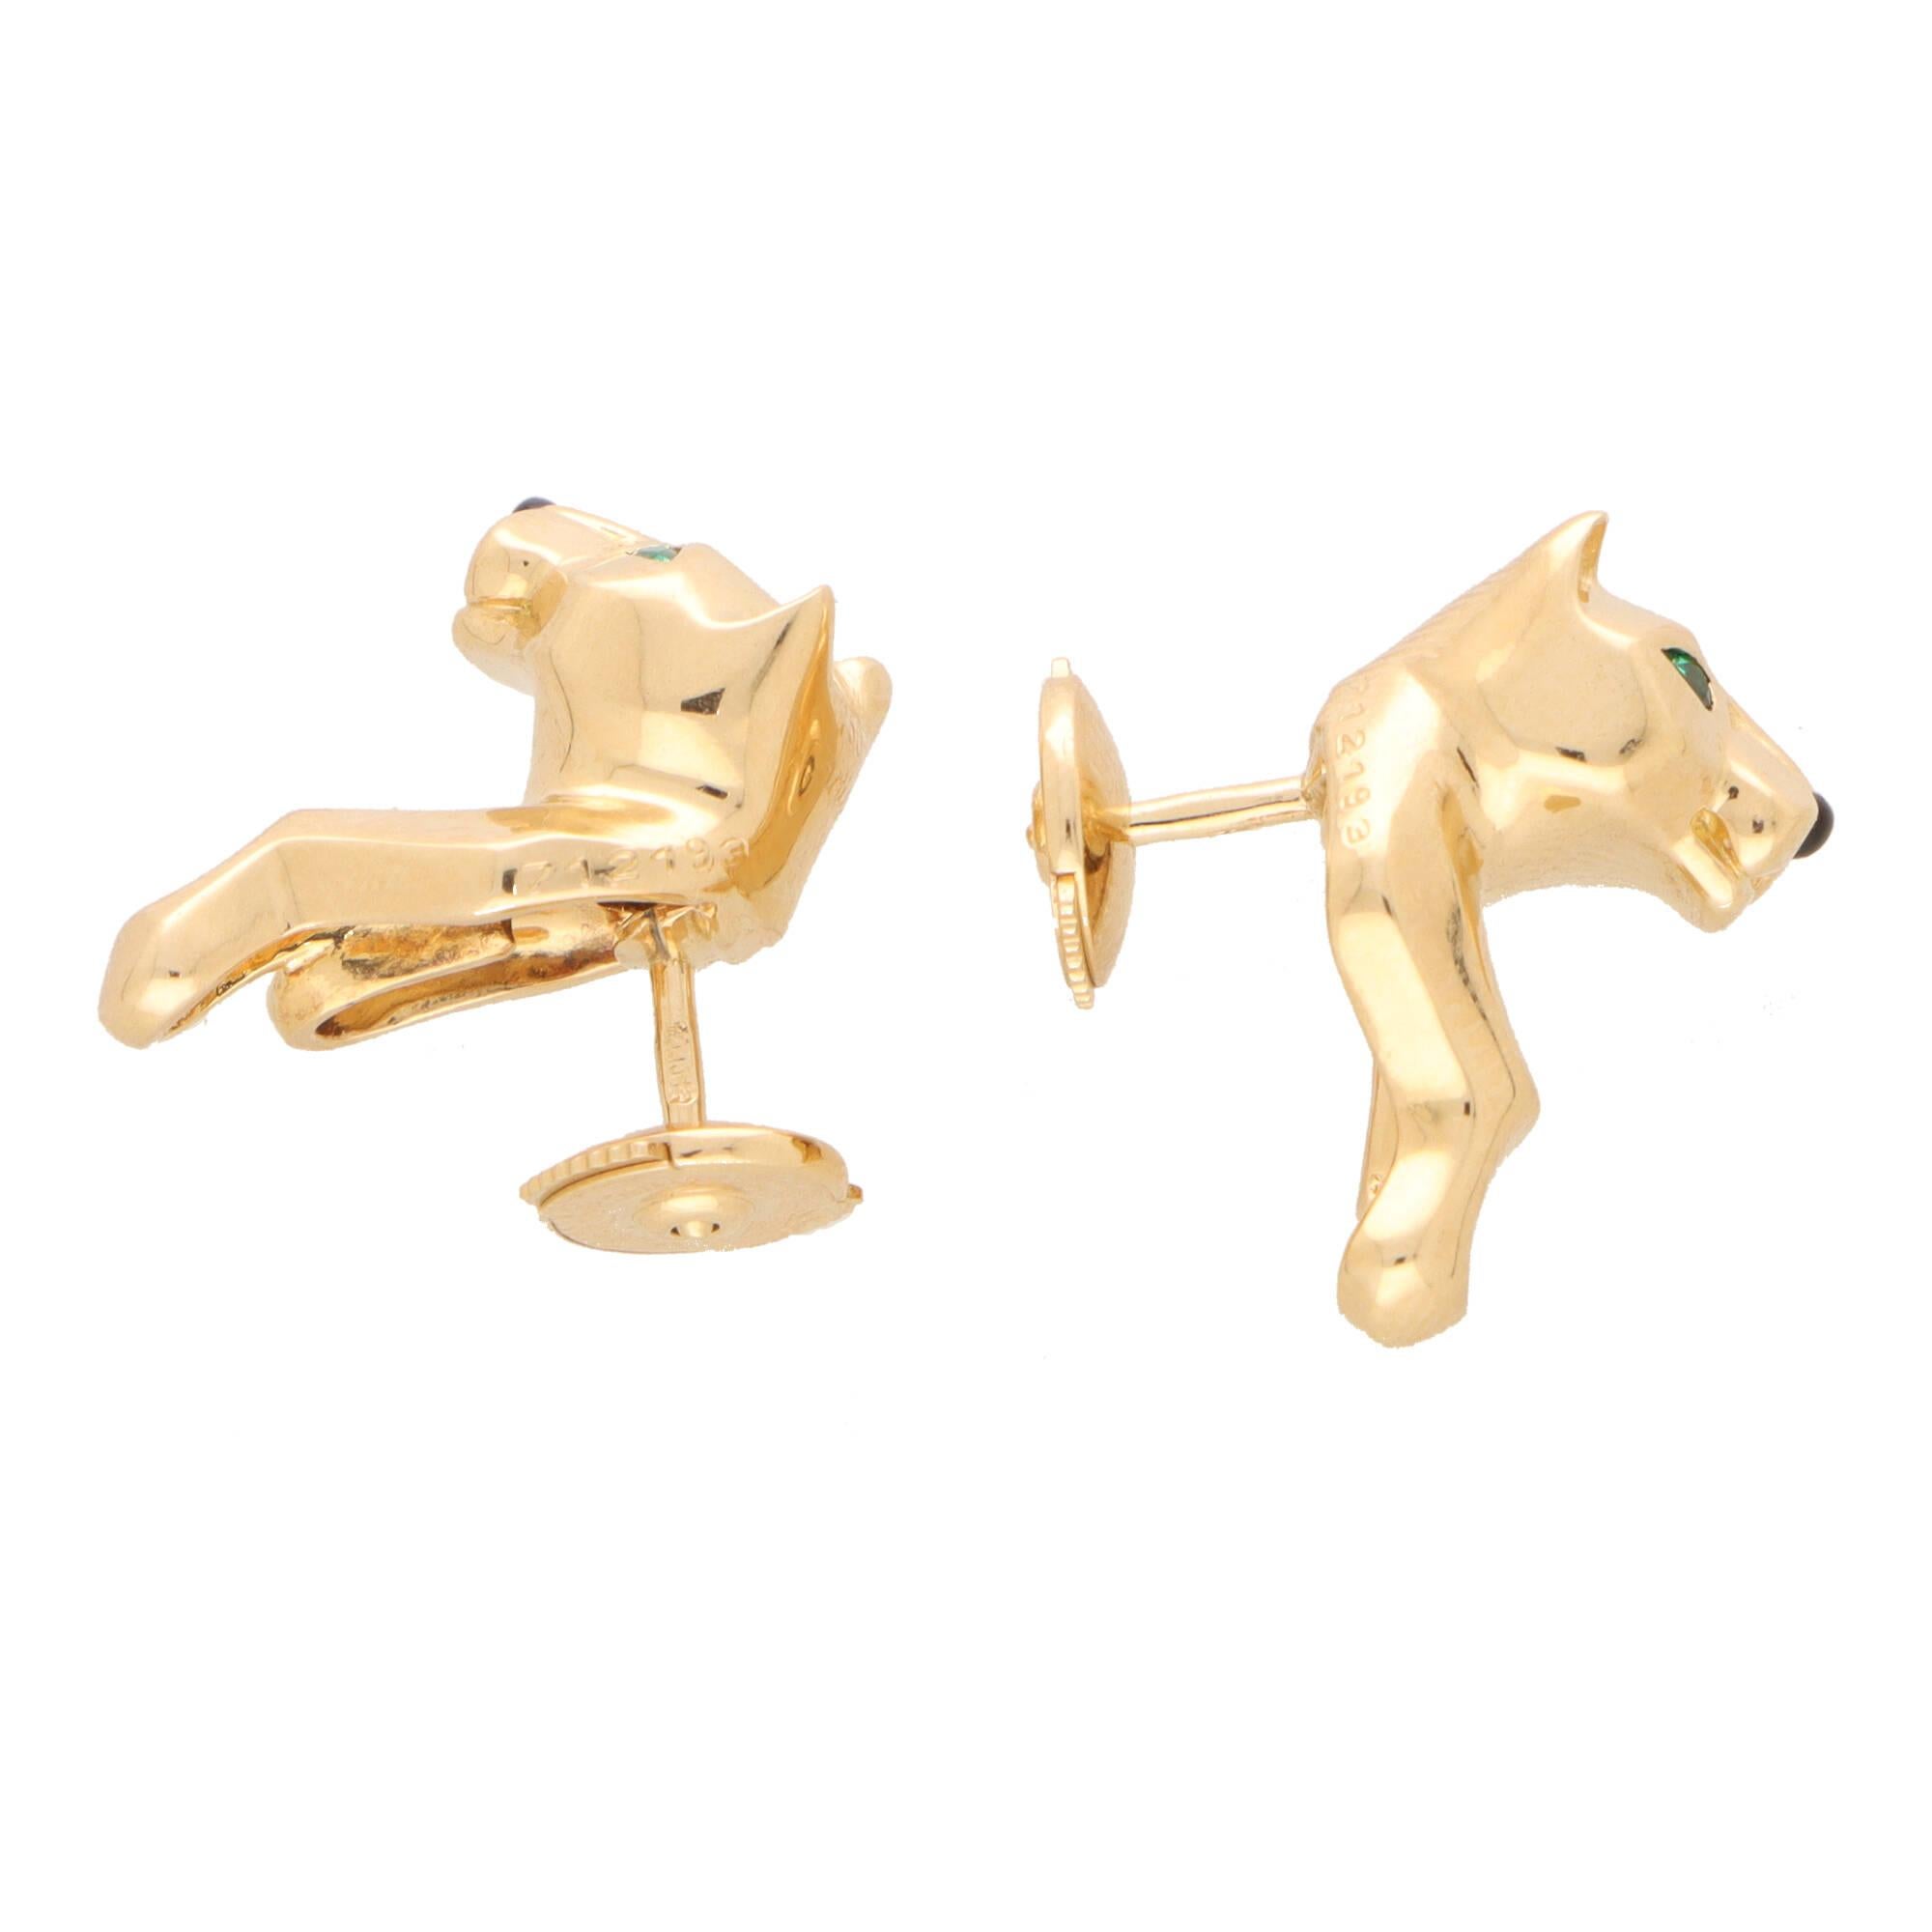 Retro Vintage Cartier Panther Earrings Set in 18k Yellow Gold